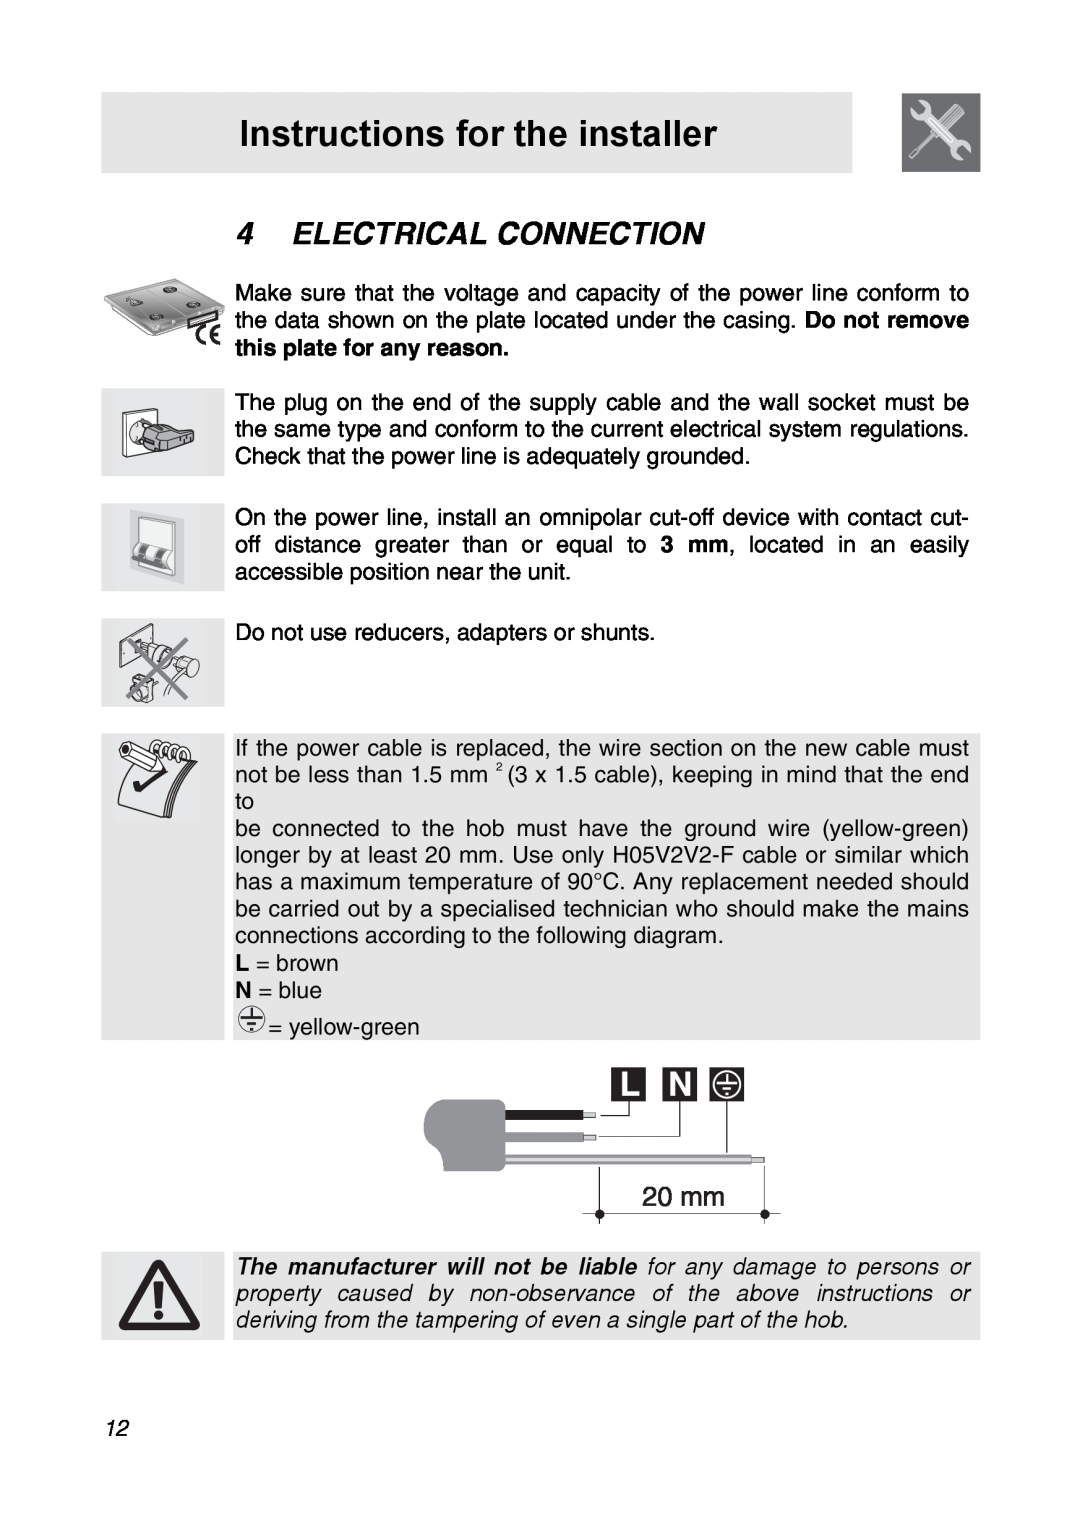 Smeg CIR34XS manual Electrical Connection, this plate for any reason, Instructions for the installer 